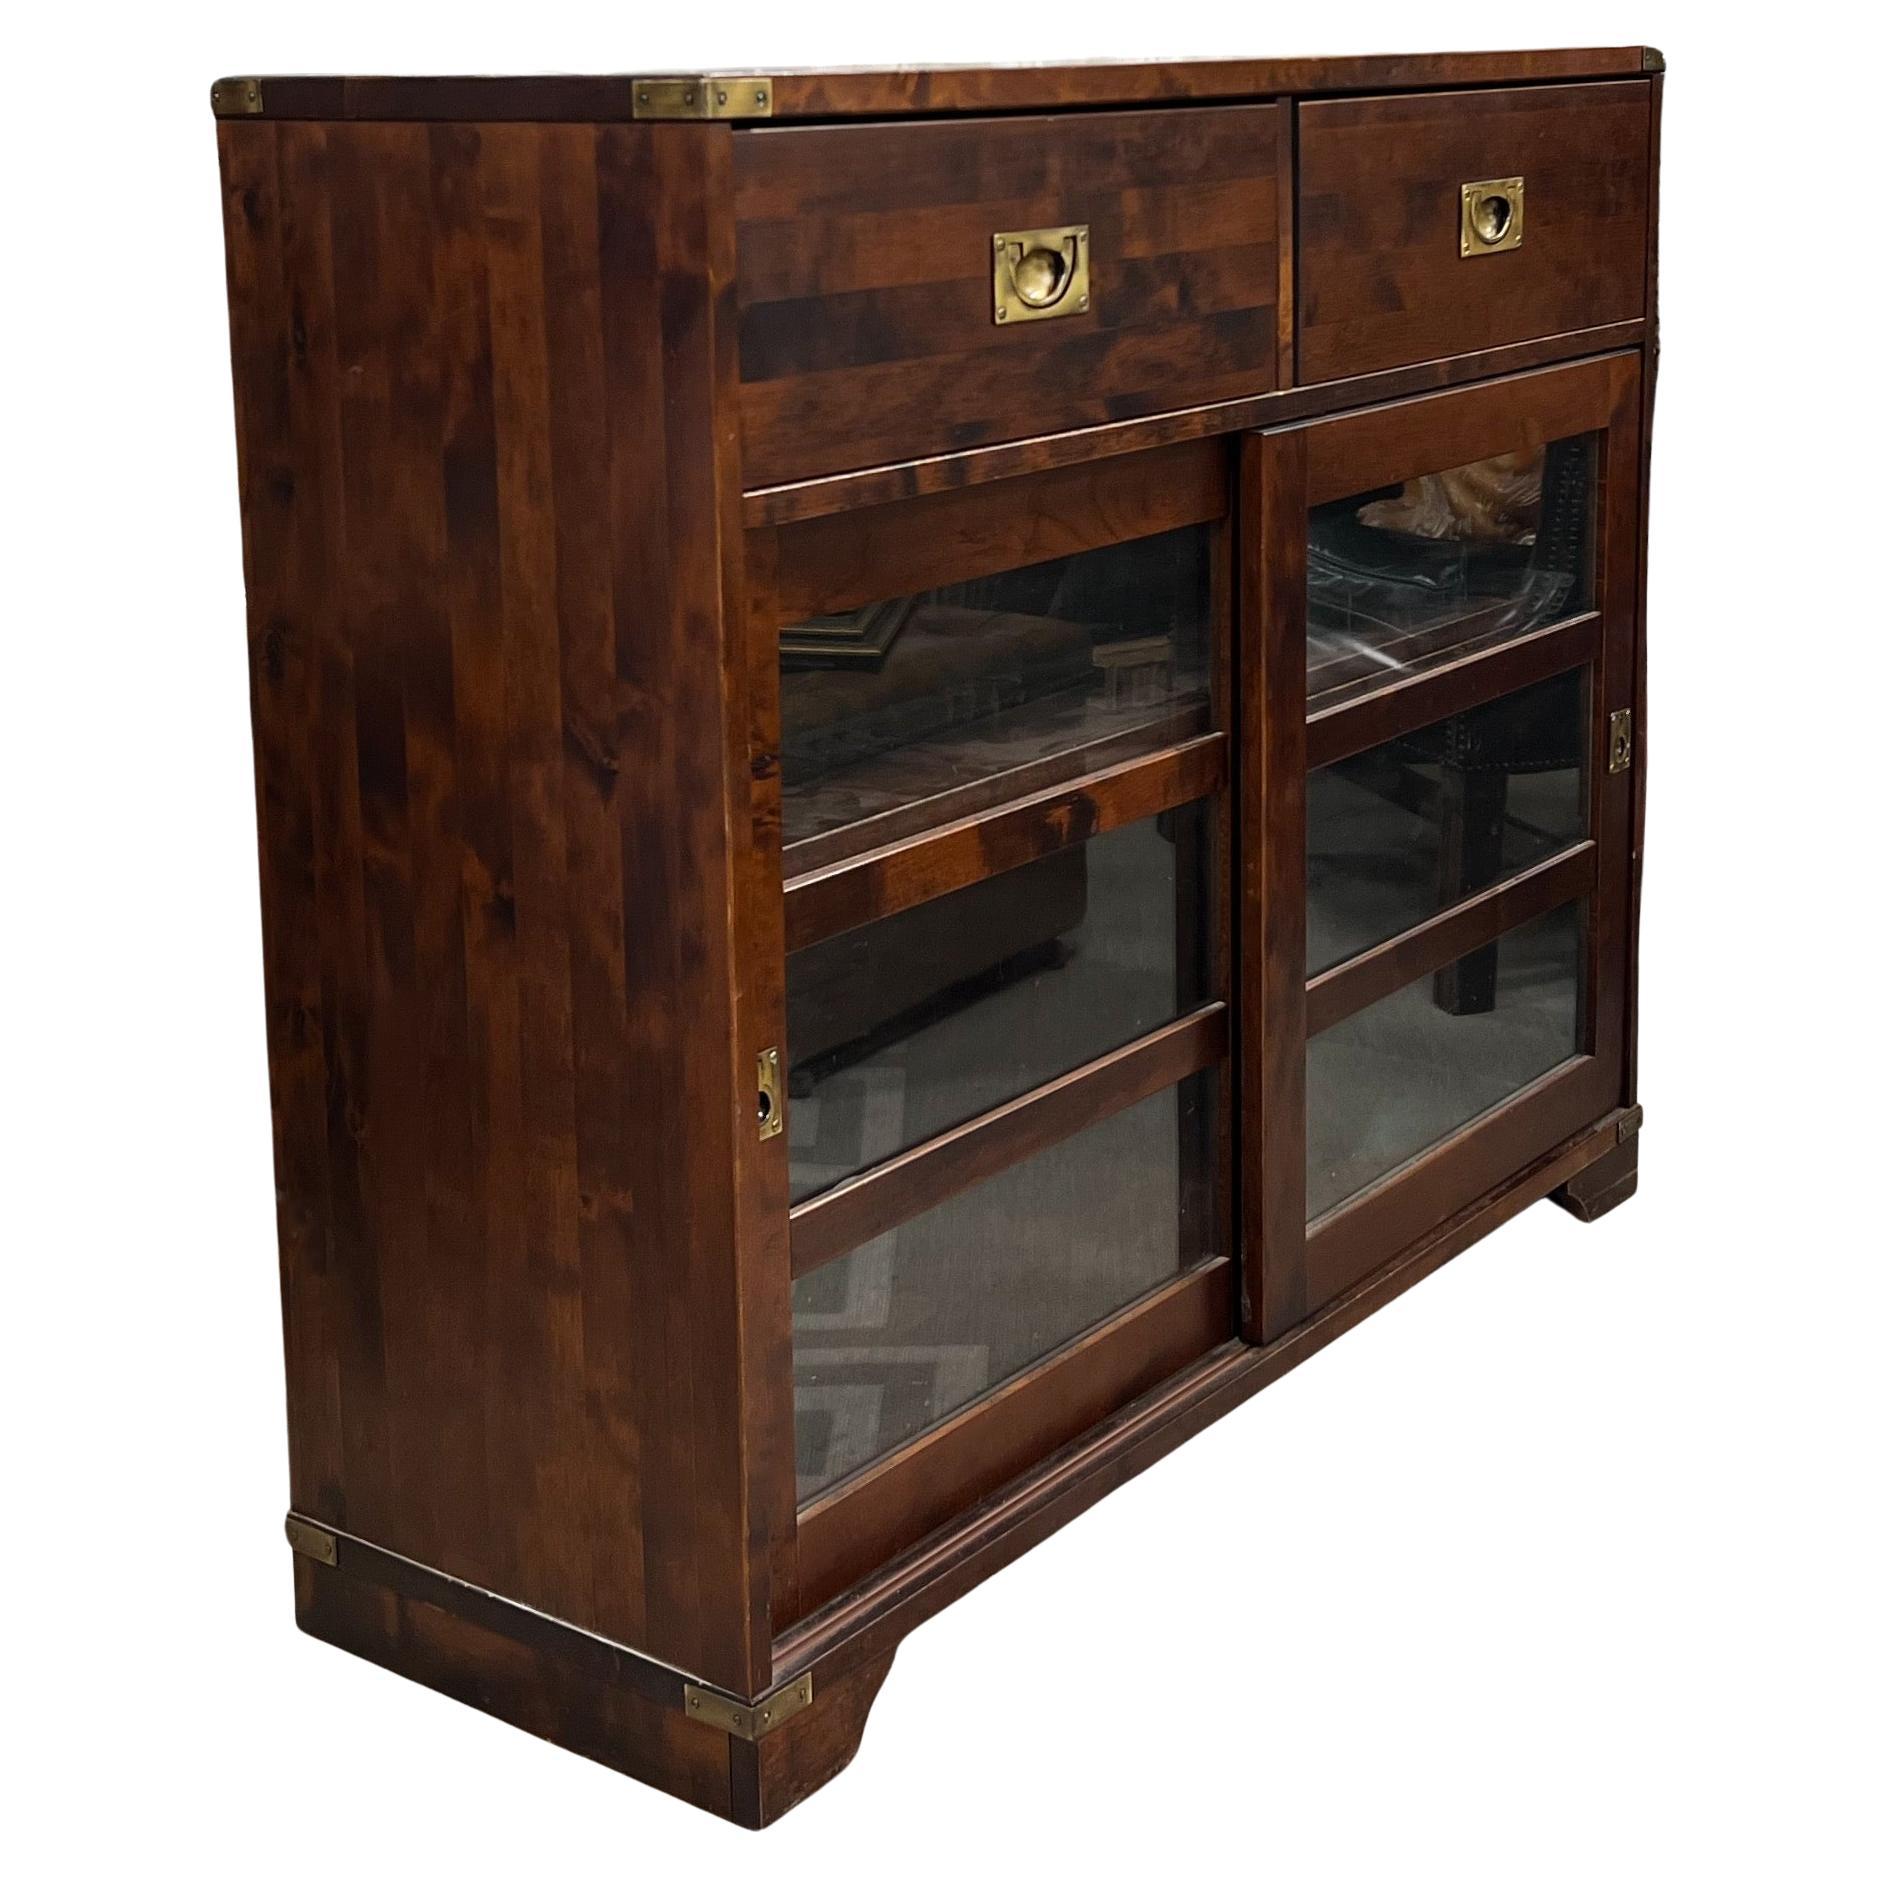 American Late 20th-C. English Campaign Style Mahogany and Brass Bookcase / Shelving